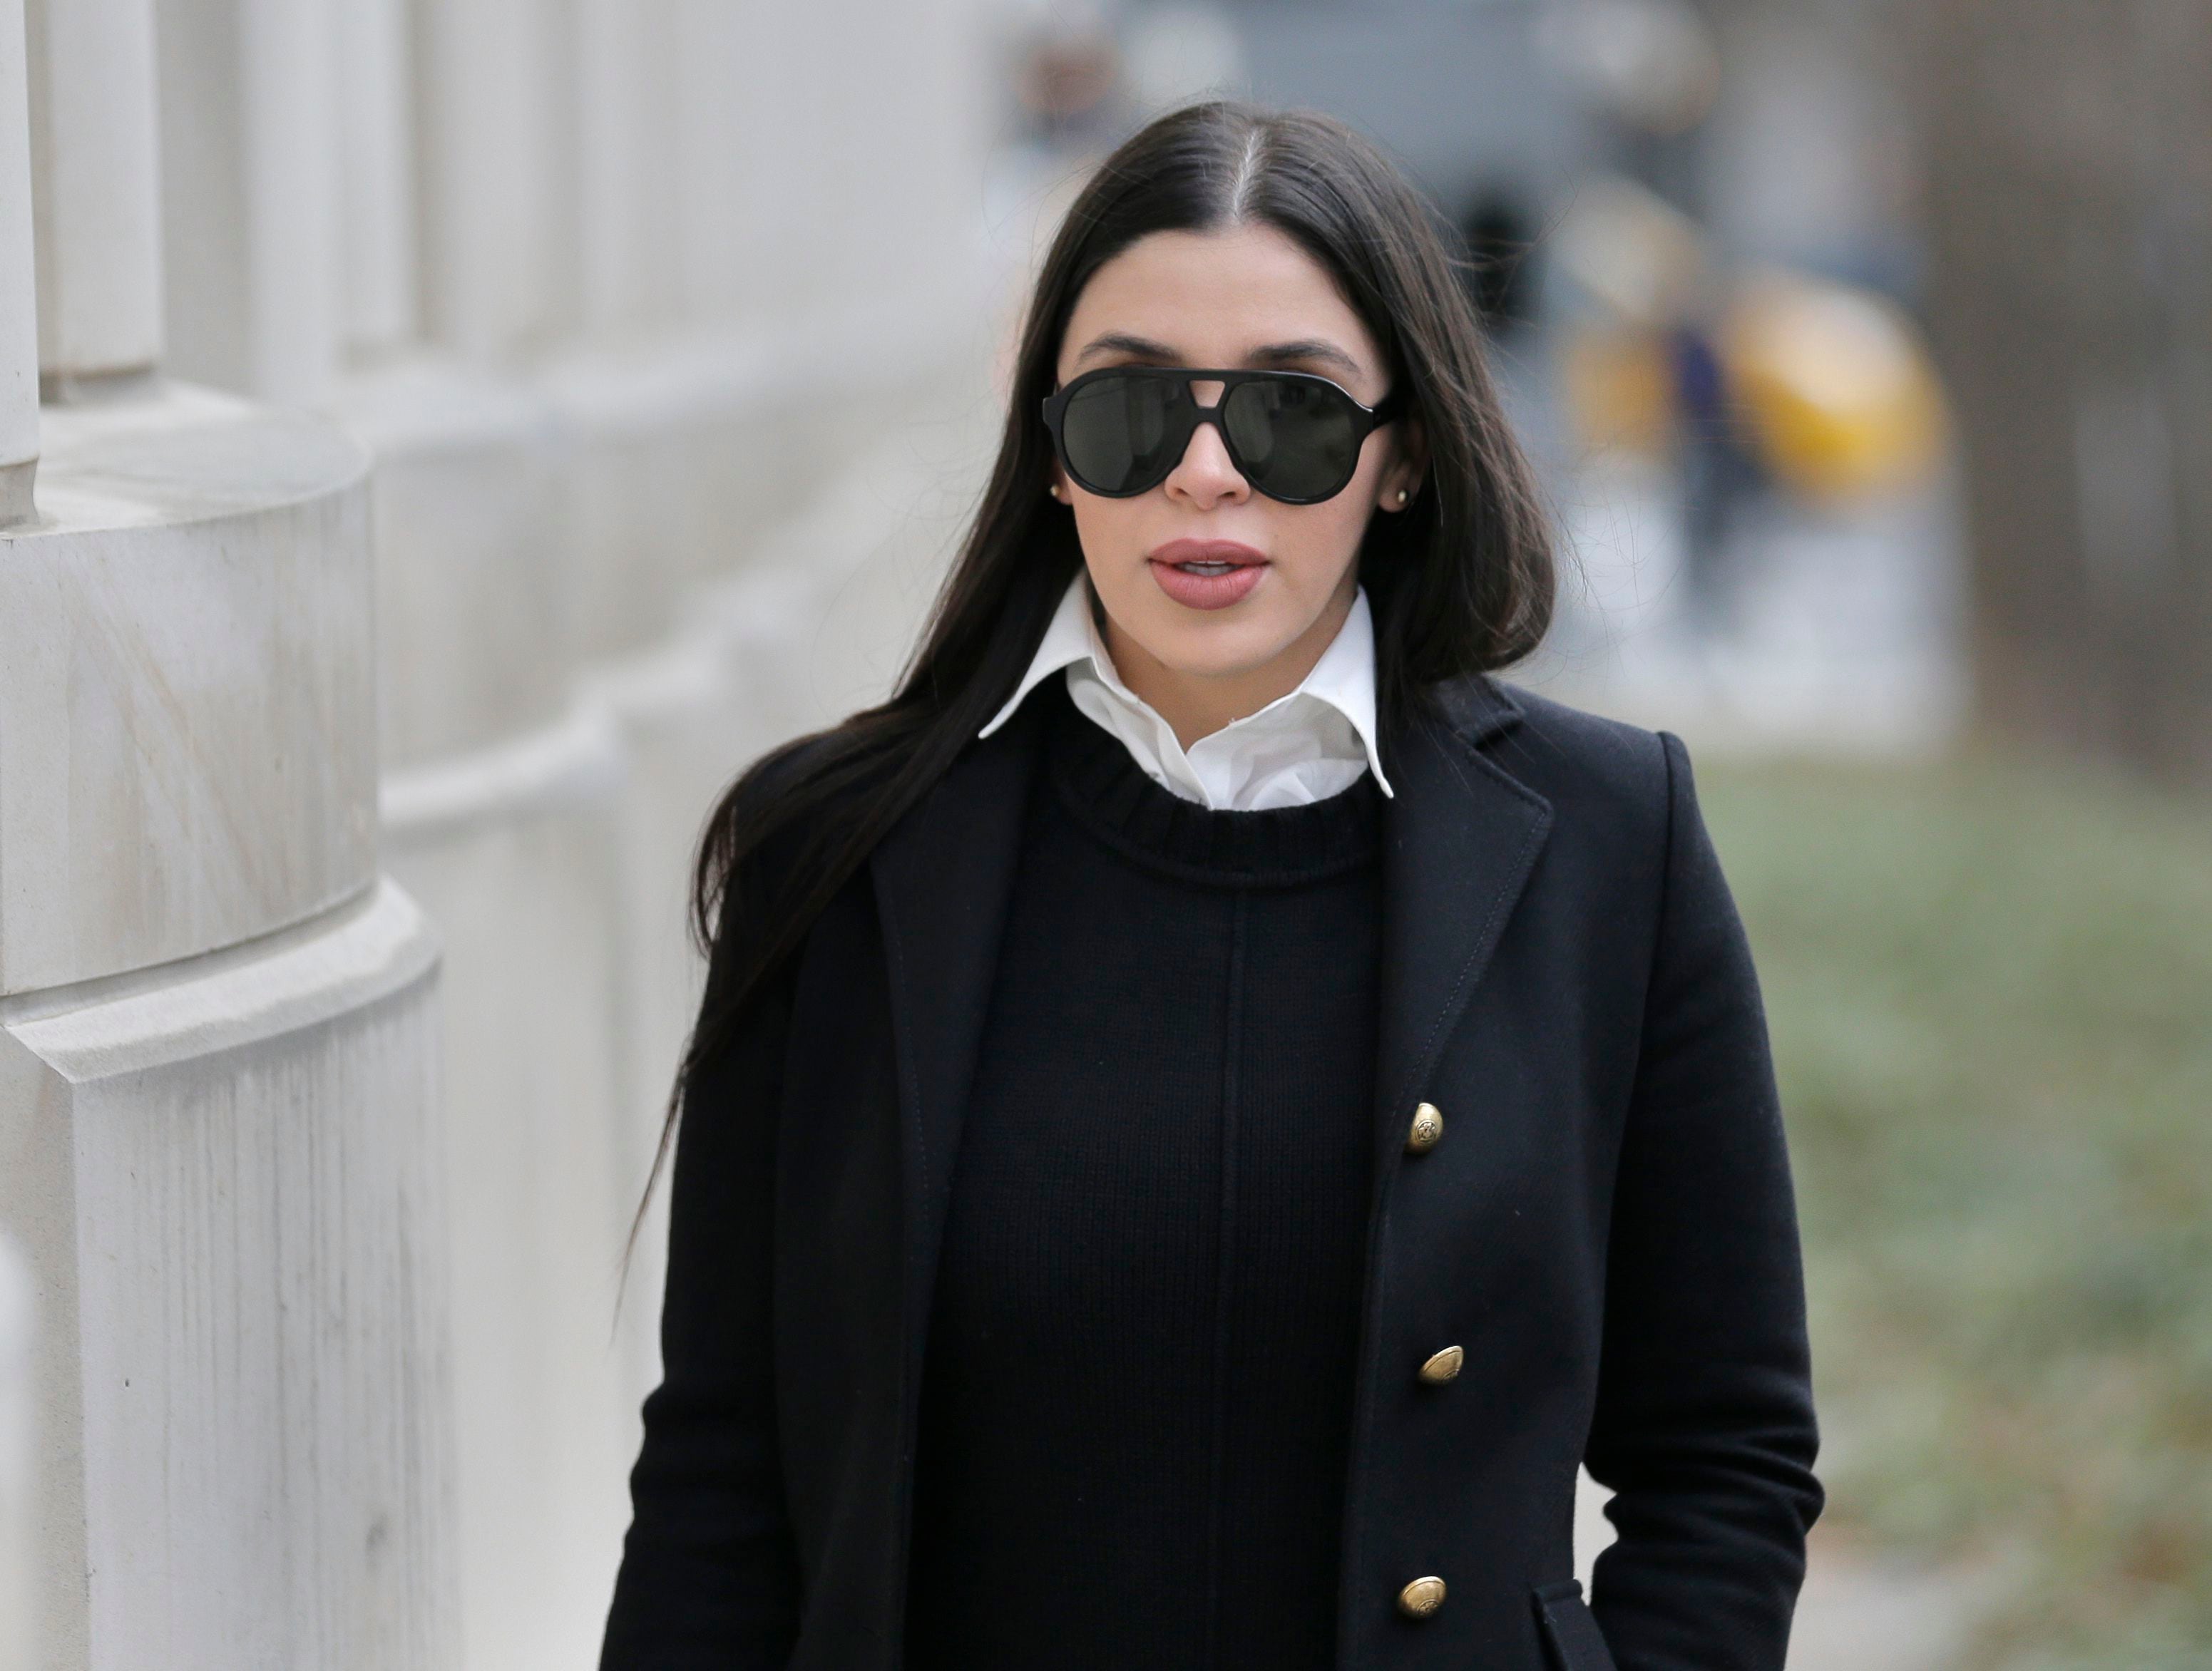 Emma Coronel Aispuro, wife of Joaquin "El Chapo" Guzman, arrives to federal court in New York, Thursday, Dec. 6, 2018.   Guzman is charged with running a massive drug trafficking operation that laundered billions of dollars and oversaw murders and kidnappings.  (AP Photo/Seth Wenig)